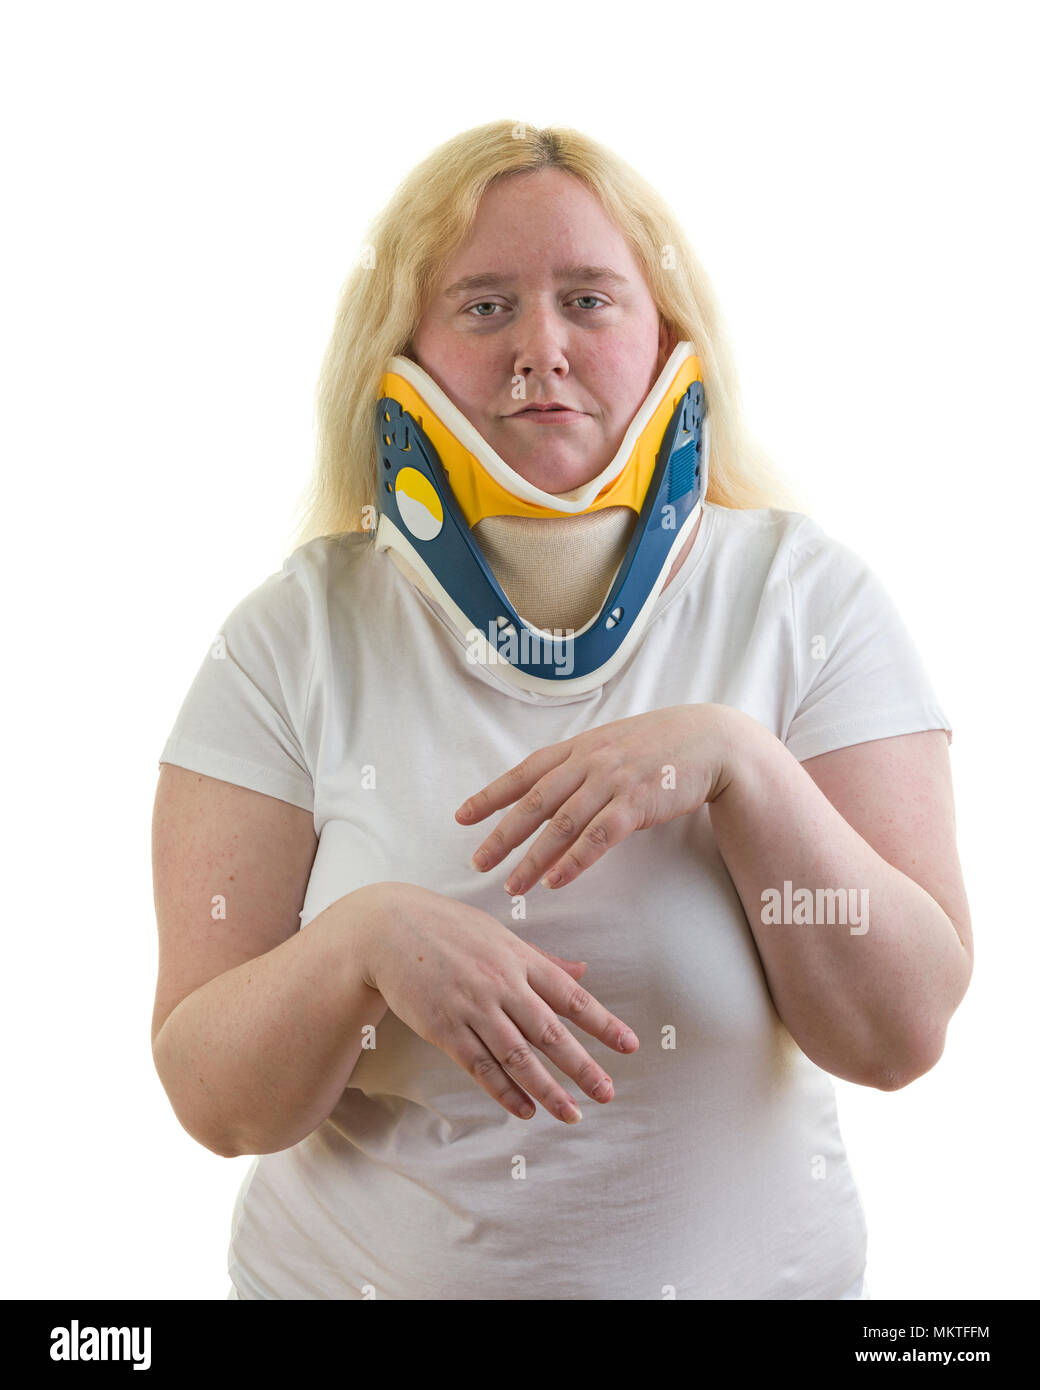 Caucasian blonde adult 30s female woman wearing a cervical collar aka a C  spine collar or neck brace isolated on white background Model Release: Yes  Property Release: No Stock Photo - Alamy